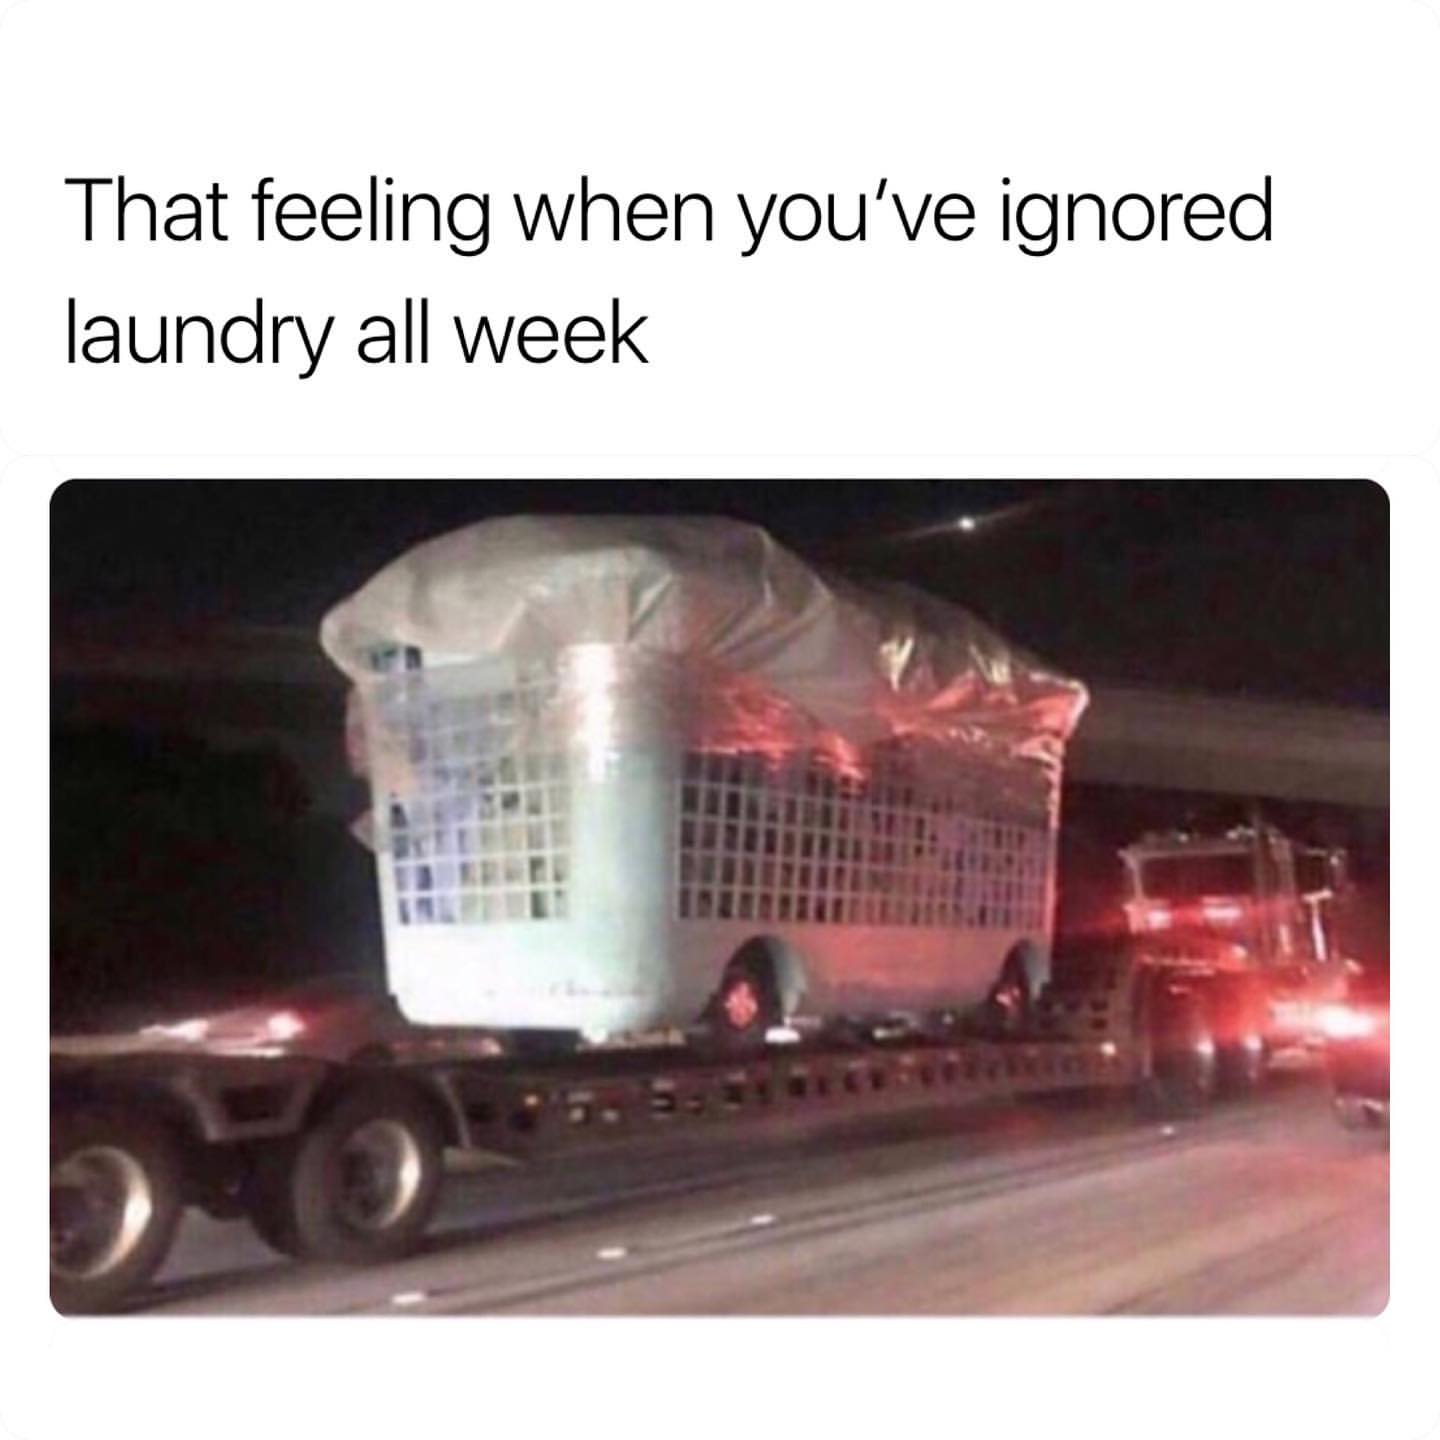 That feeling when you've ignored laundry all week.